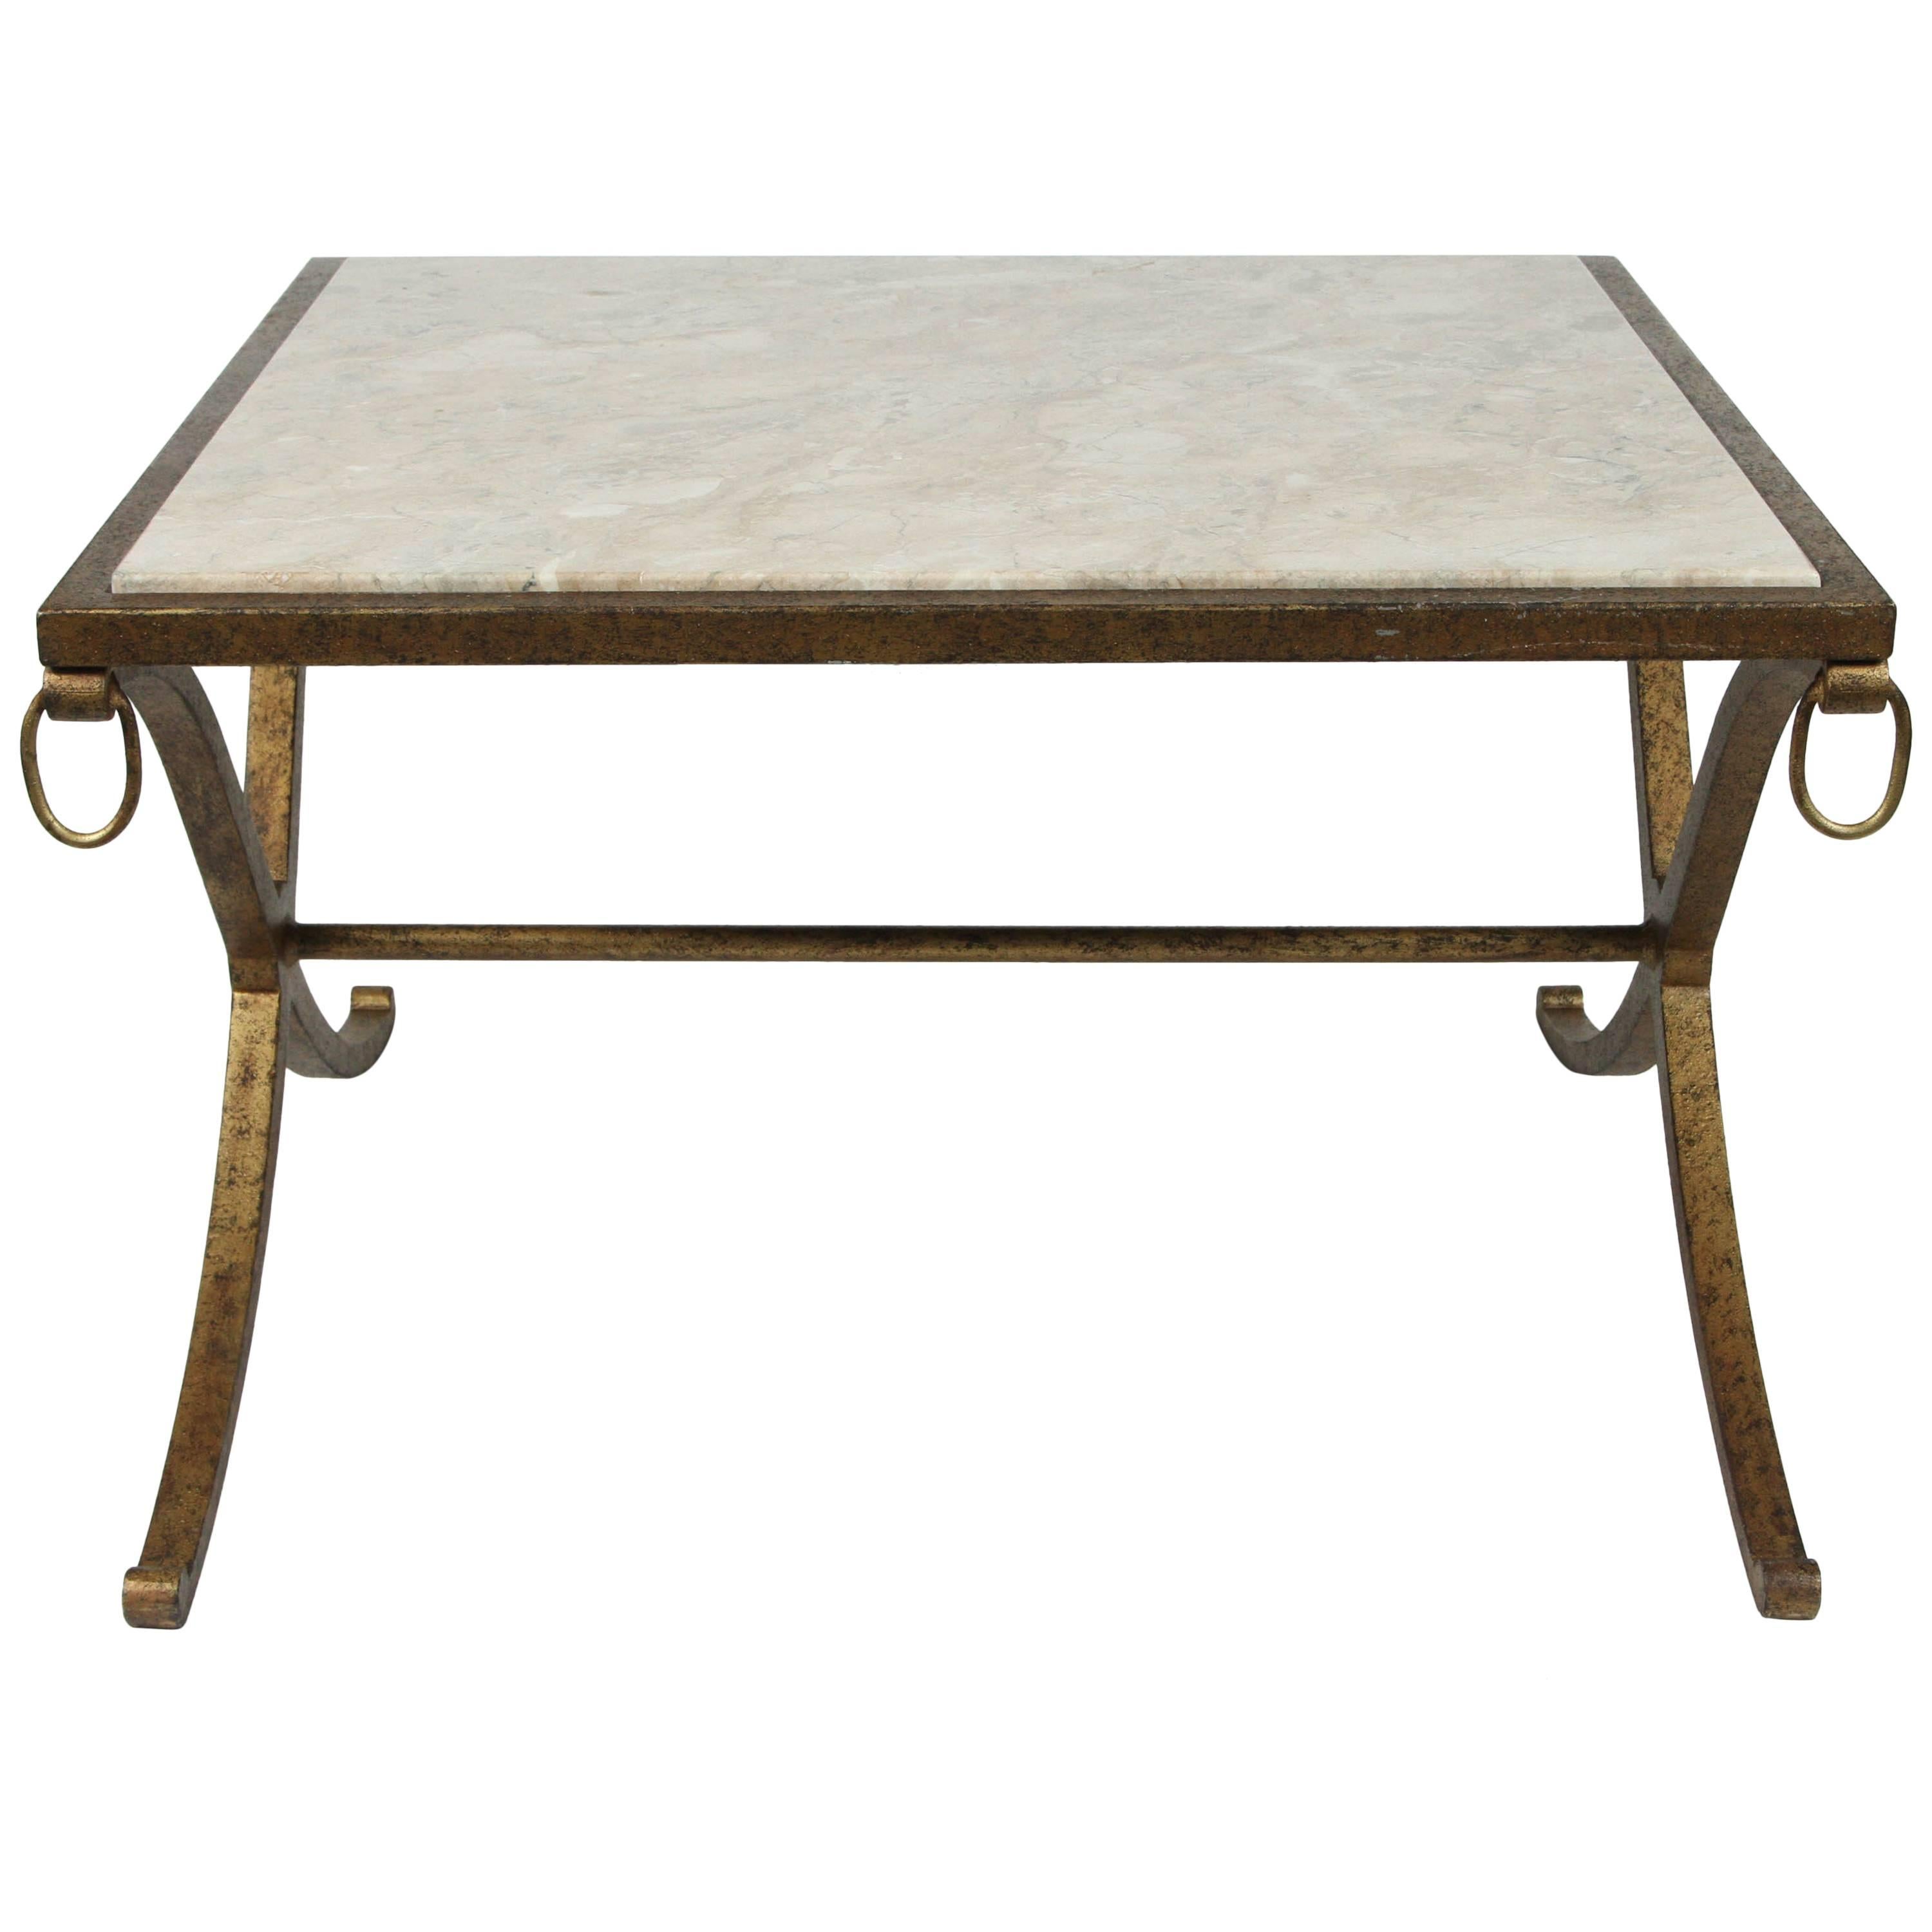 A Vintage Classical Style Low Table